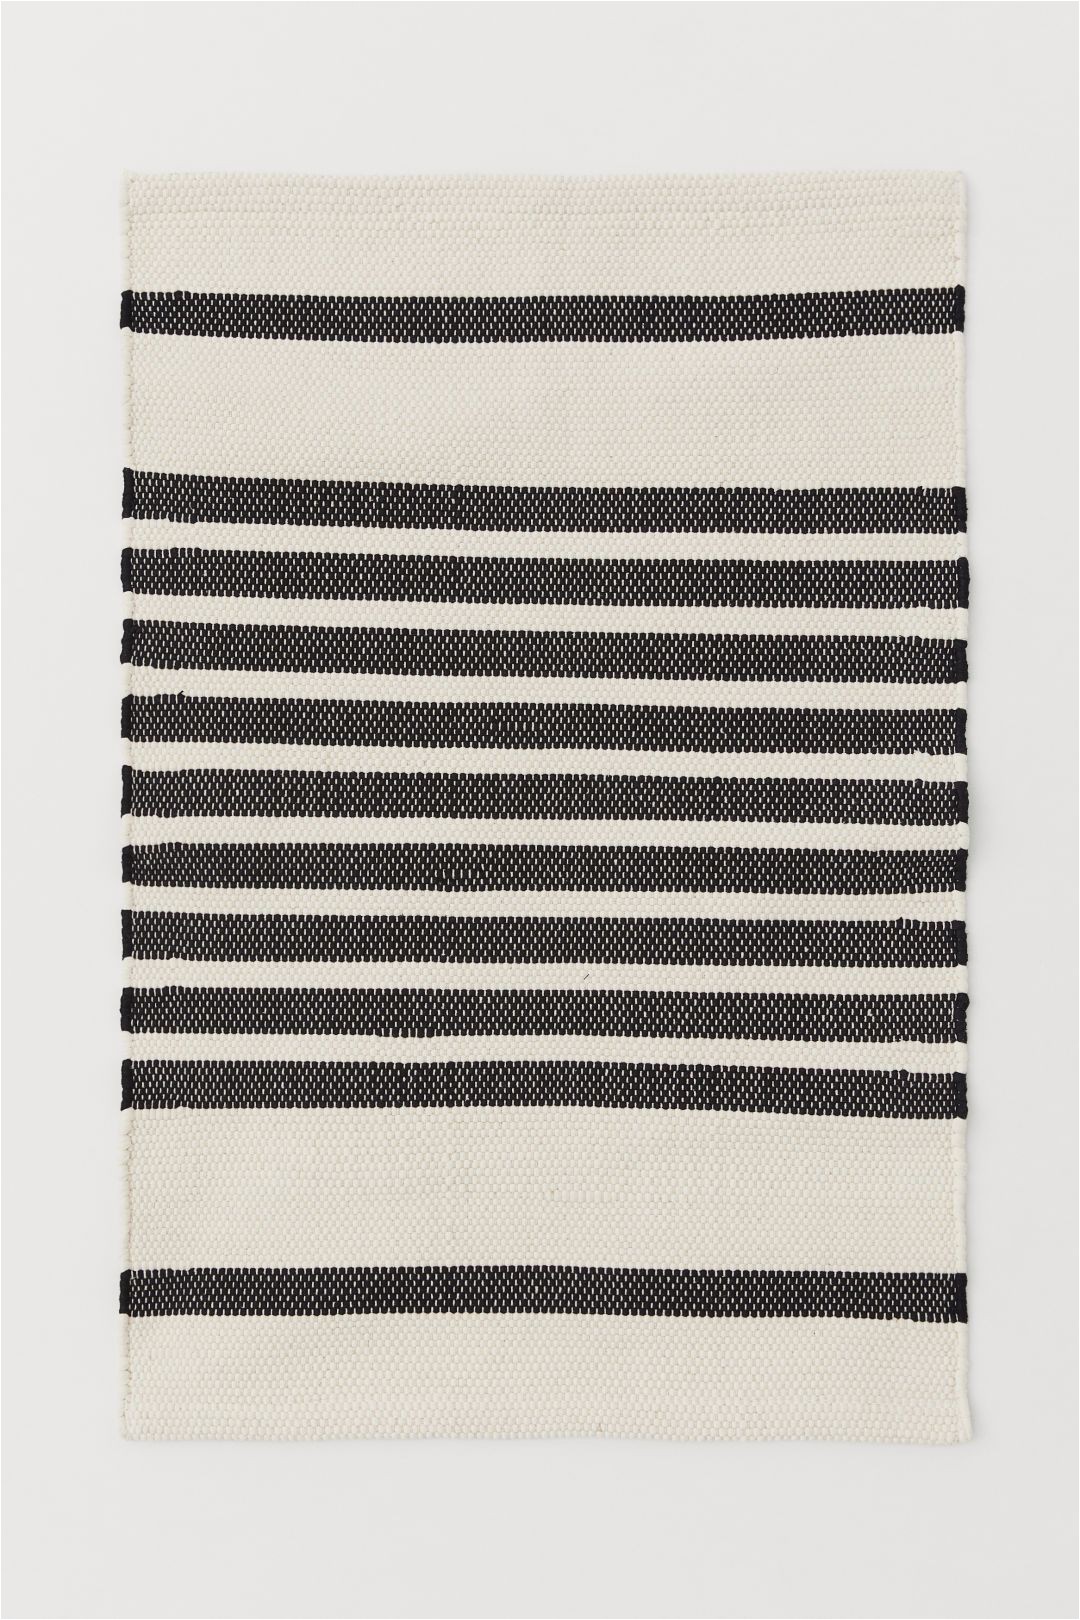 Black Bath Rugs On Sale Striped Floor Mat Natural White Black Striped Home All